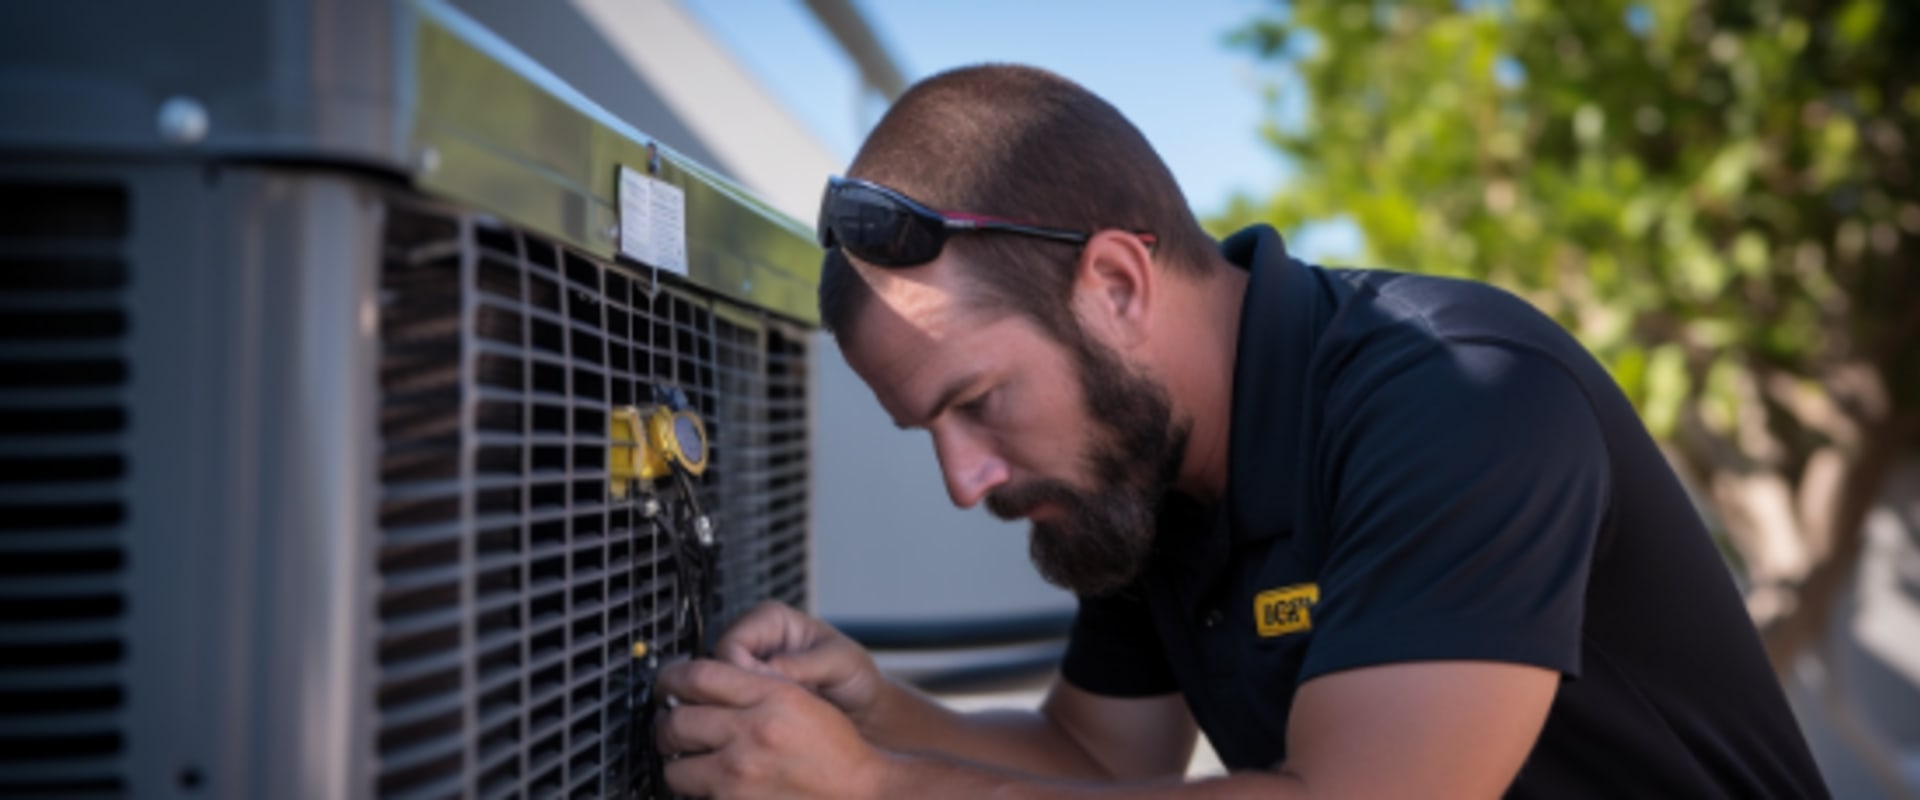 Expert HVAC Air Conditioning Replacement Services in Pembroke Pines FL